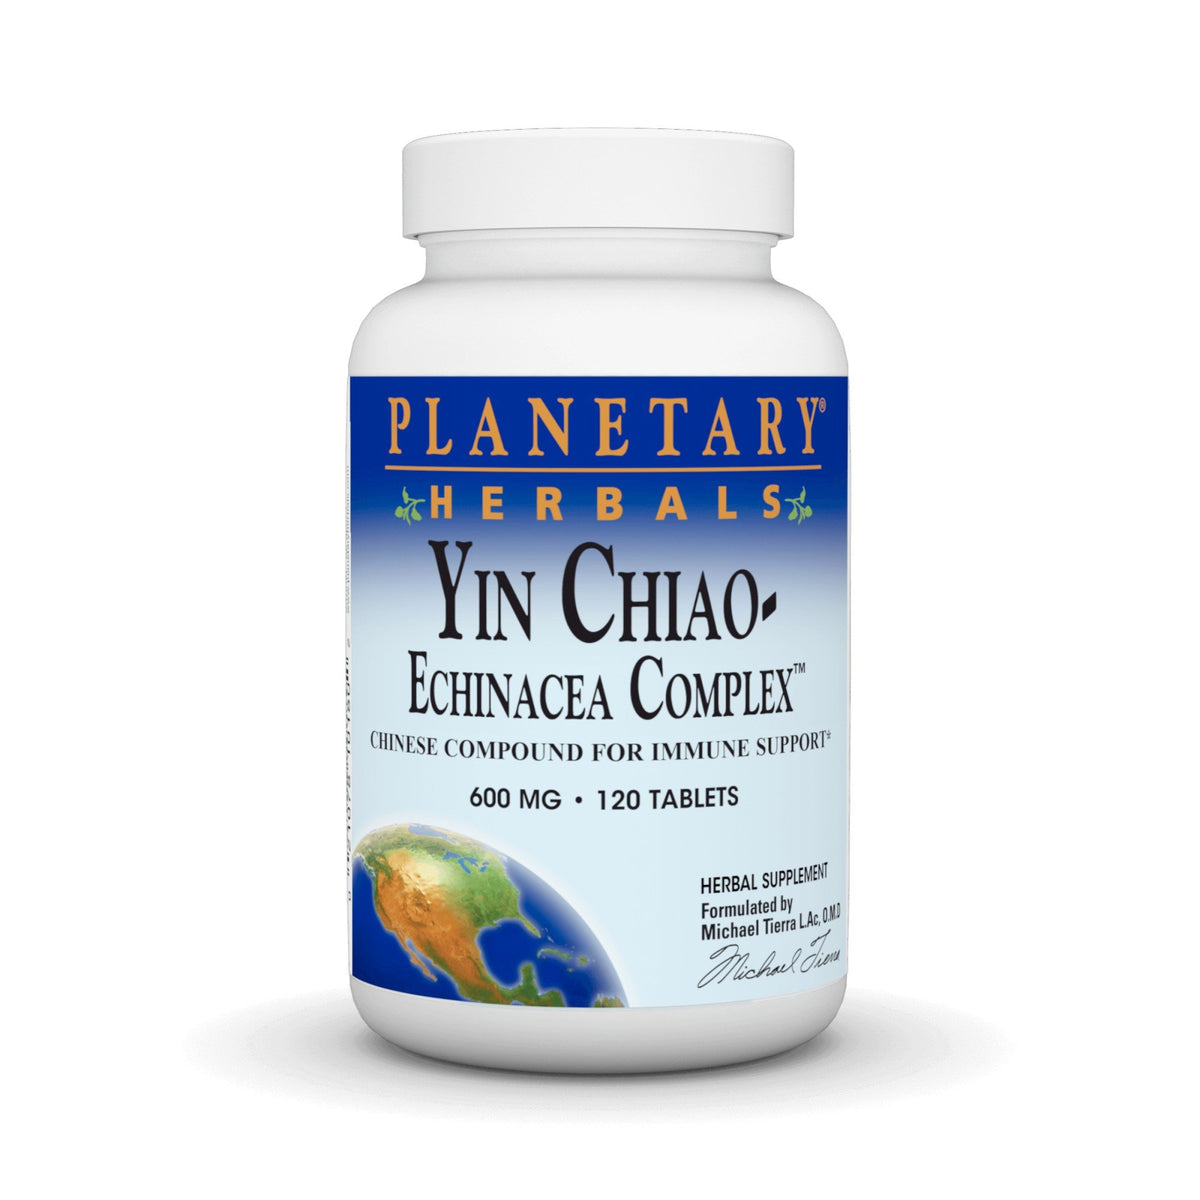 Planetary Herbals Yin Chiao-Echinacea Complex 120 Tablet